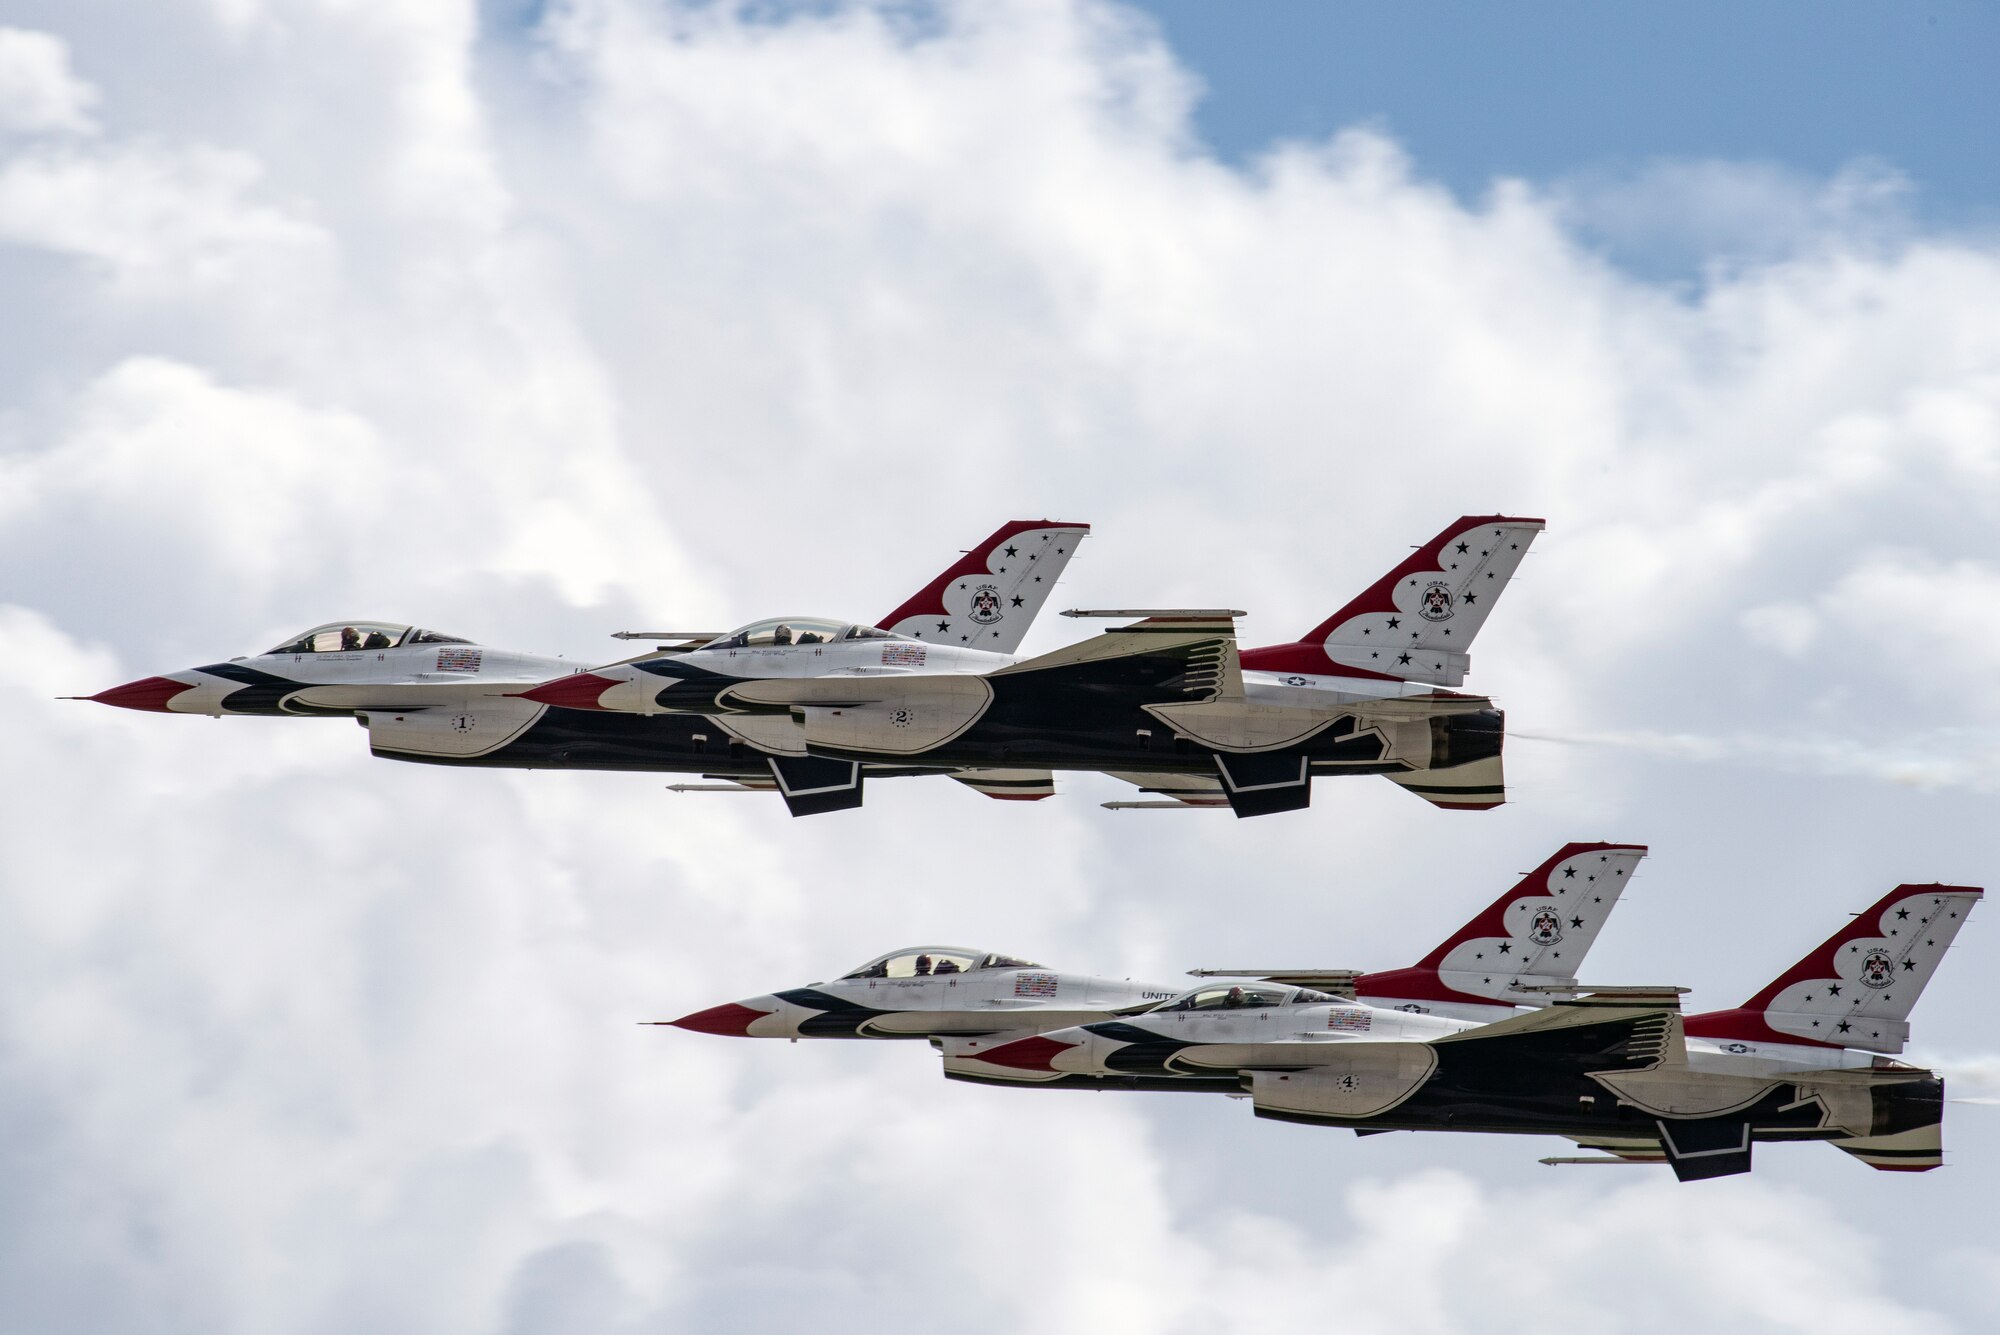 The U.S. Air Force Thunderbirds demonstration team arrive for the “Thunder Over the Bay” Air Show at Travis Air Force Base, California, March 30 - 31, 2019. In addition to the U.S. Air Force Thunderbirds aerial demonstration team, the two-day event will feature performances by the U.S. Army Golden Knights parachute team, flyovers, and static displays. The event honored hometown heroes like police officers, firefighters, nurses, teachers and ordinary citizens whose selfless work made their communities safer and enhanced the quality of life. (U.S. Air Force photo by David Cushman)